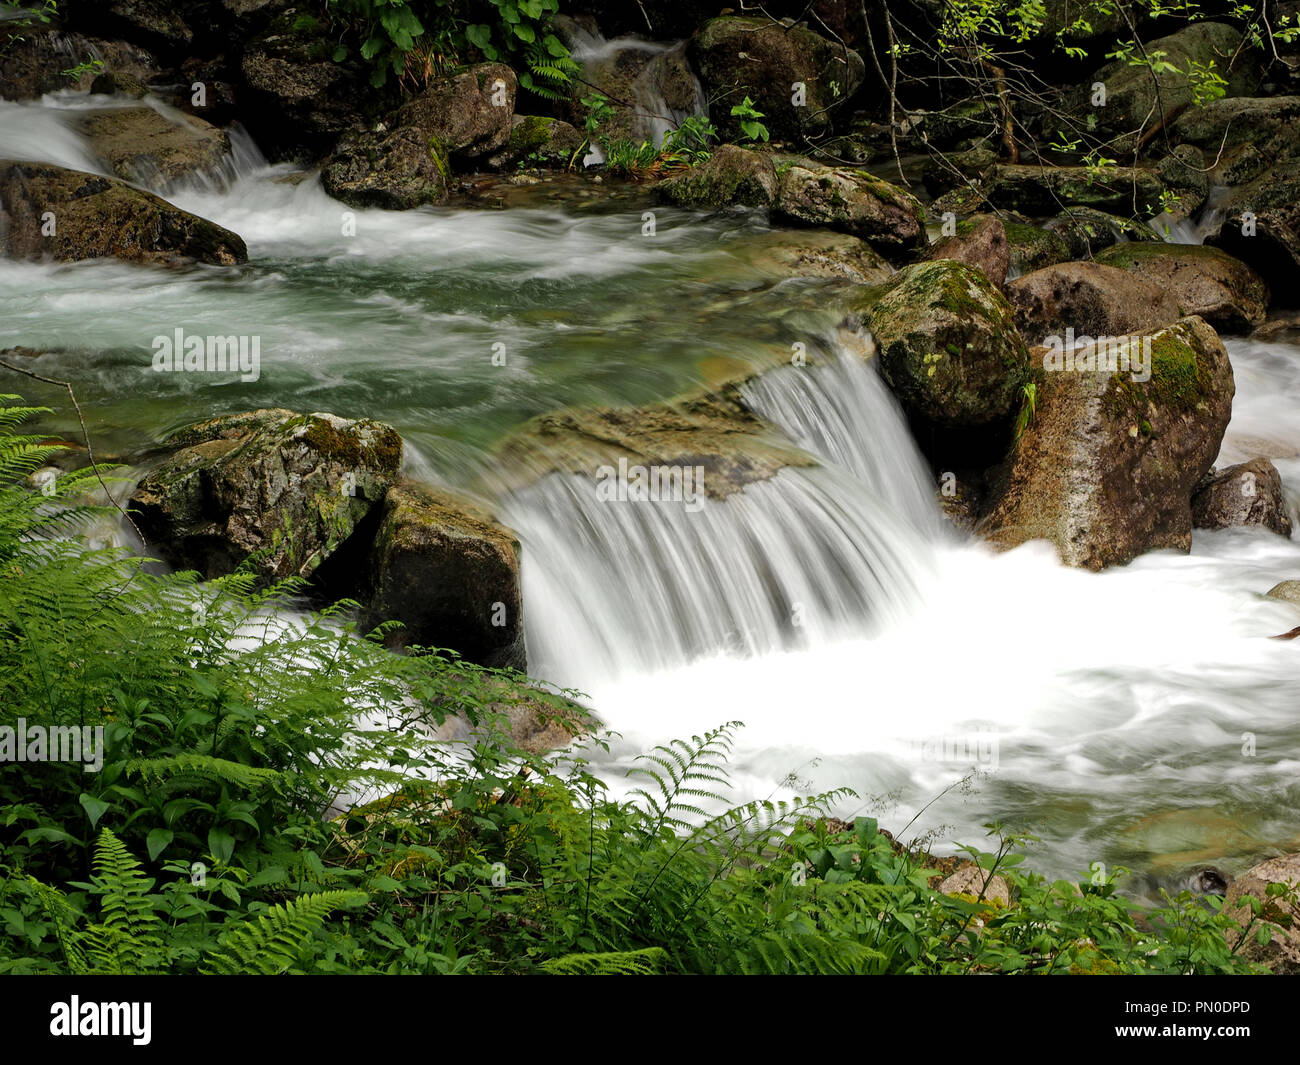 soft white rushing water of a mountain stream in the Haut Couserans area of the Ariege Pyrenees of France cascading between rocky banks and vegetation Stock Photo